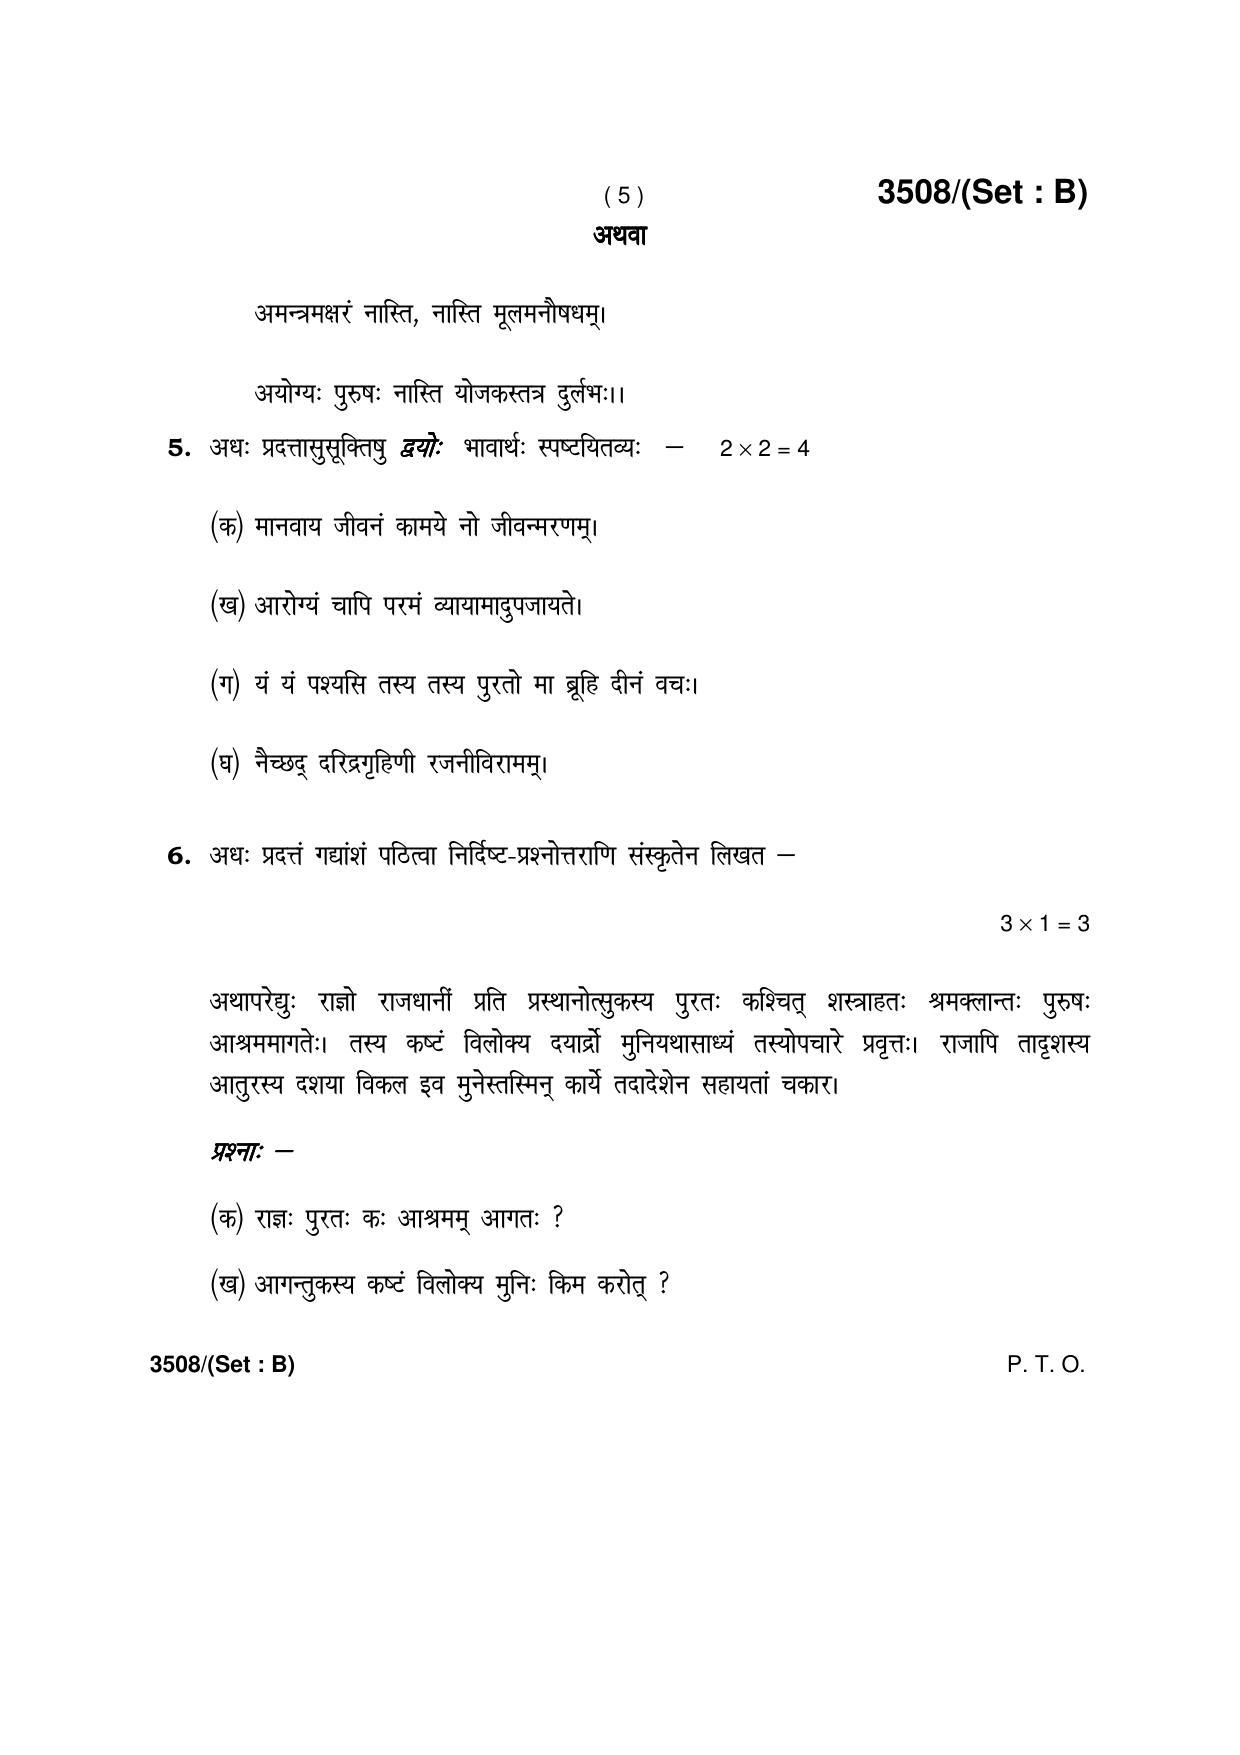 Haryana Board HBSE Class 10 Sanskrit -B 2018 Question Paper - Page 5